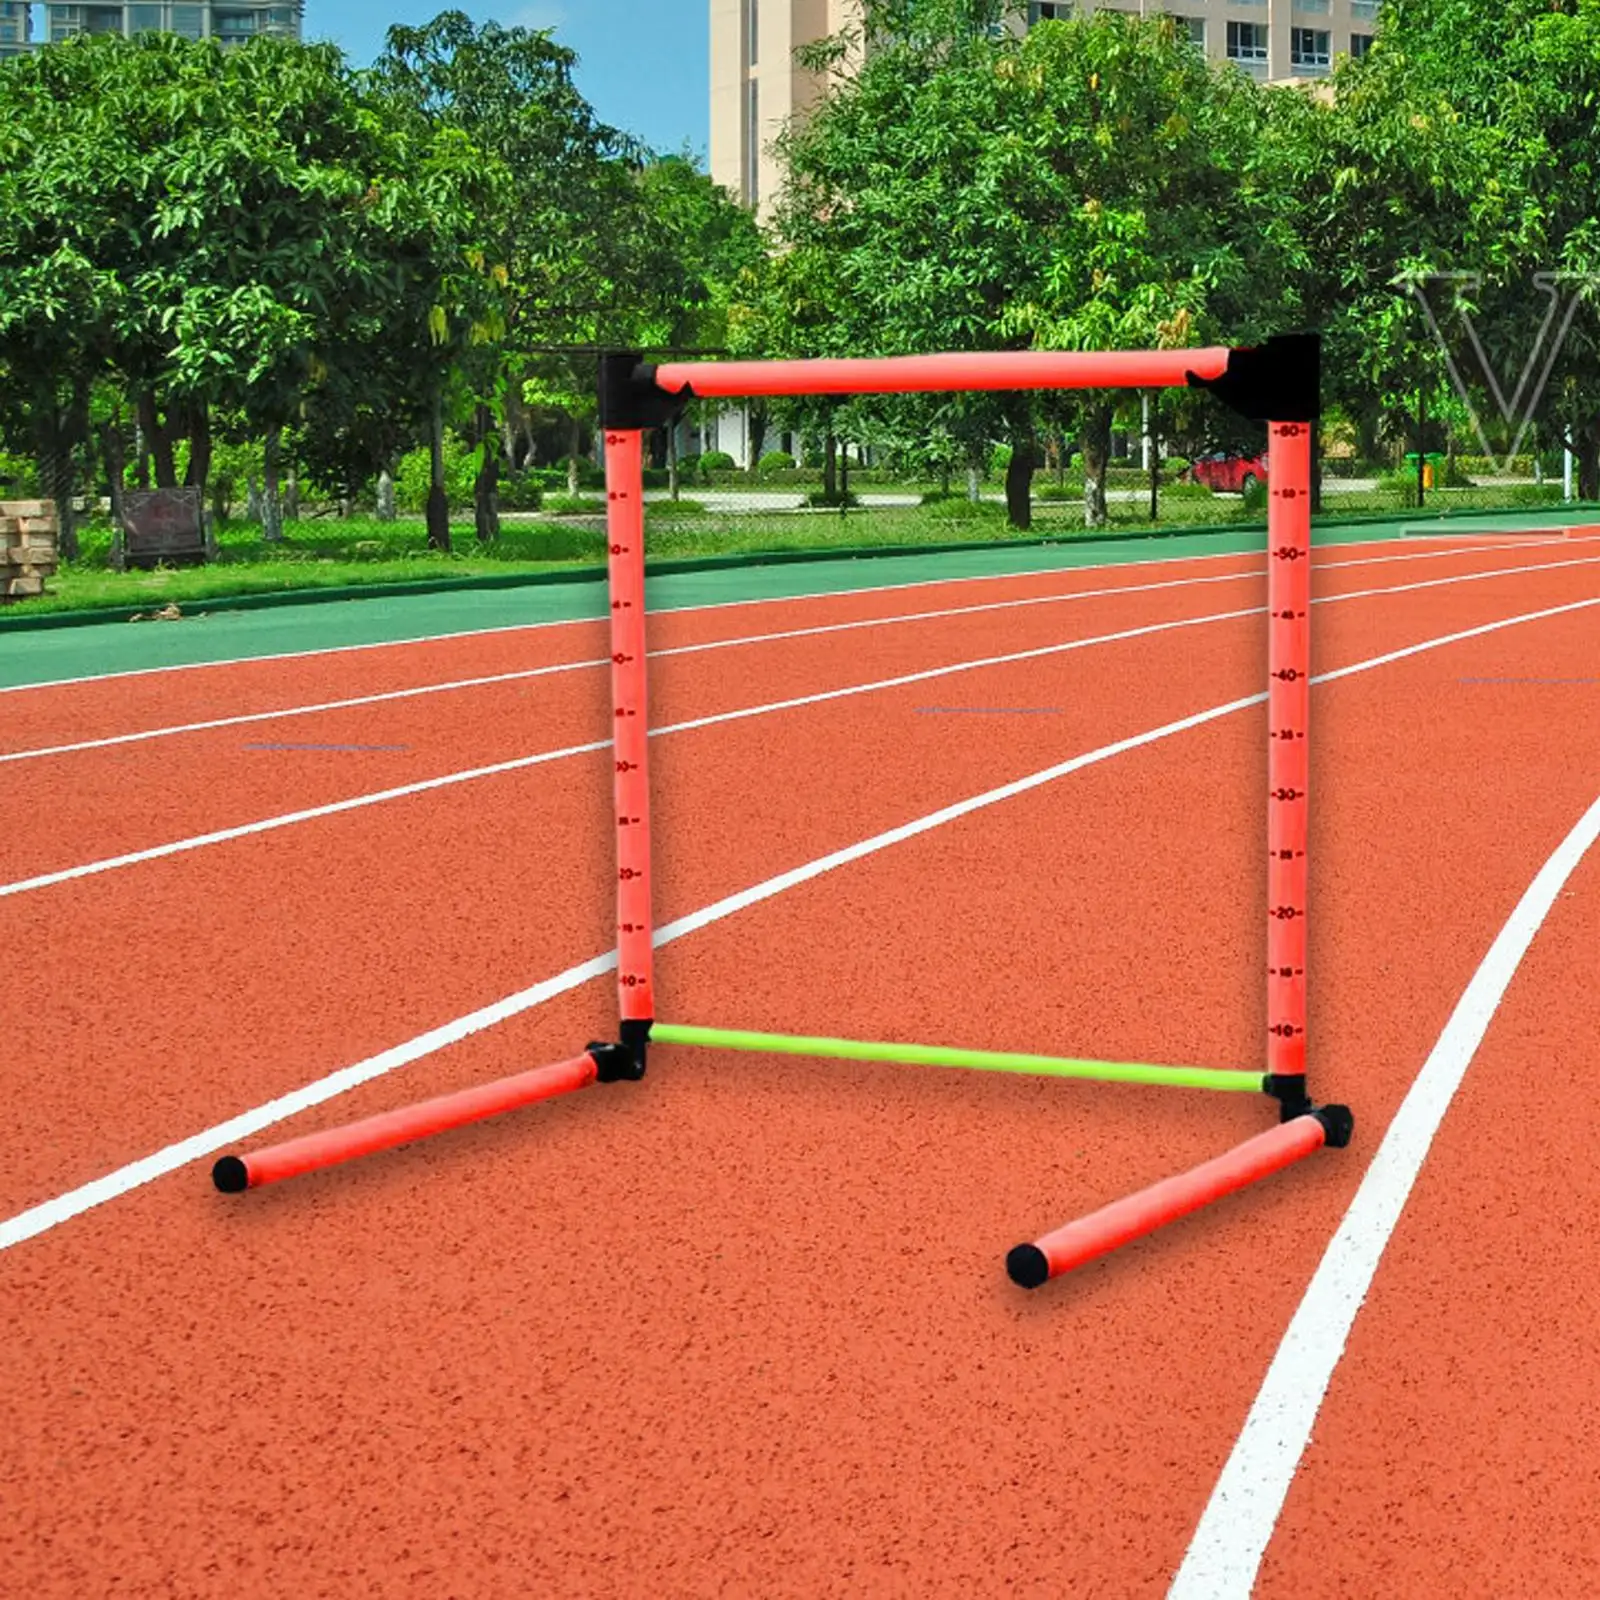 Agility Hurdles Improves Strength Coordination Fitness Adjustable Height for Baseball Basketball Football Soccer Exercise